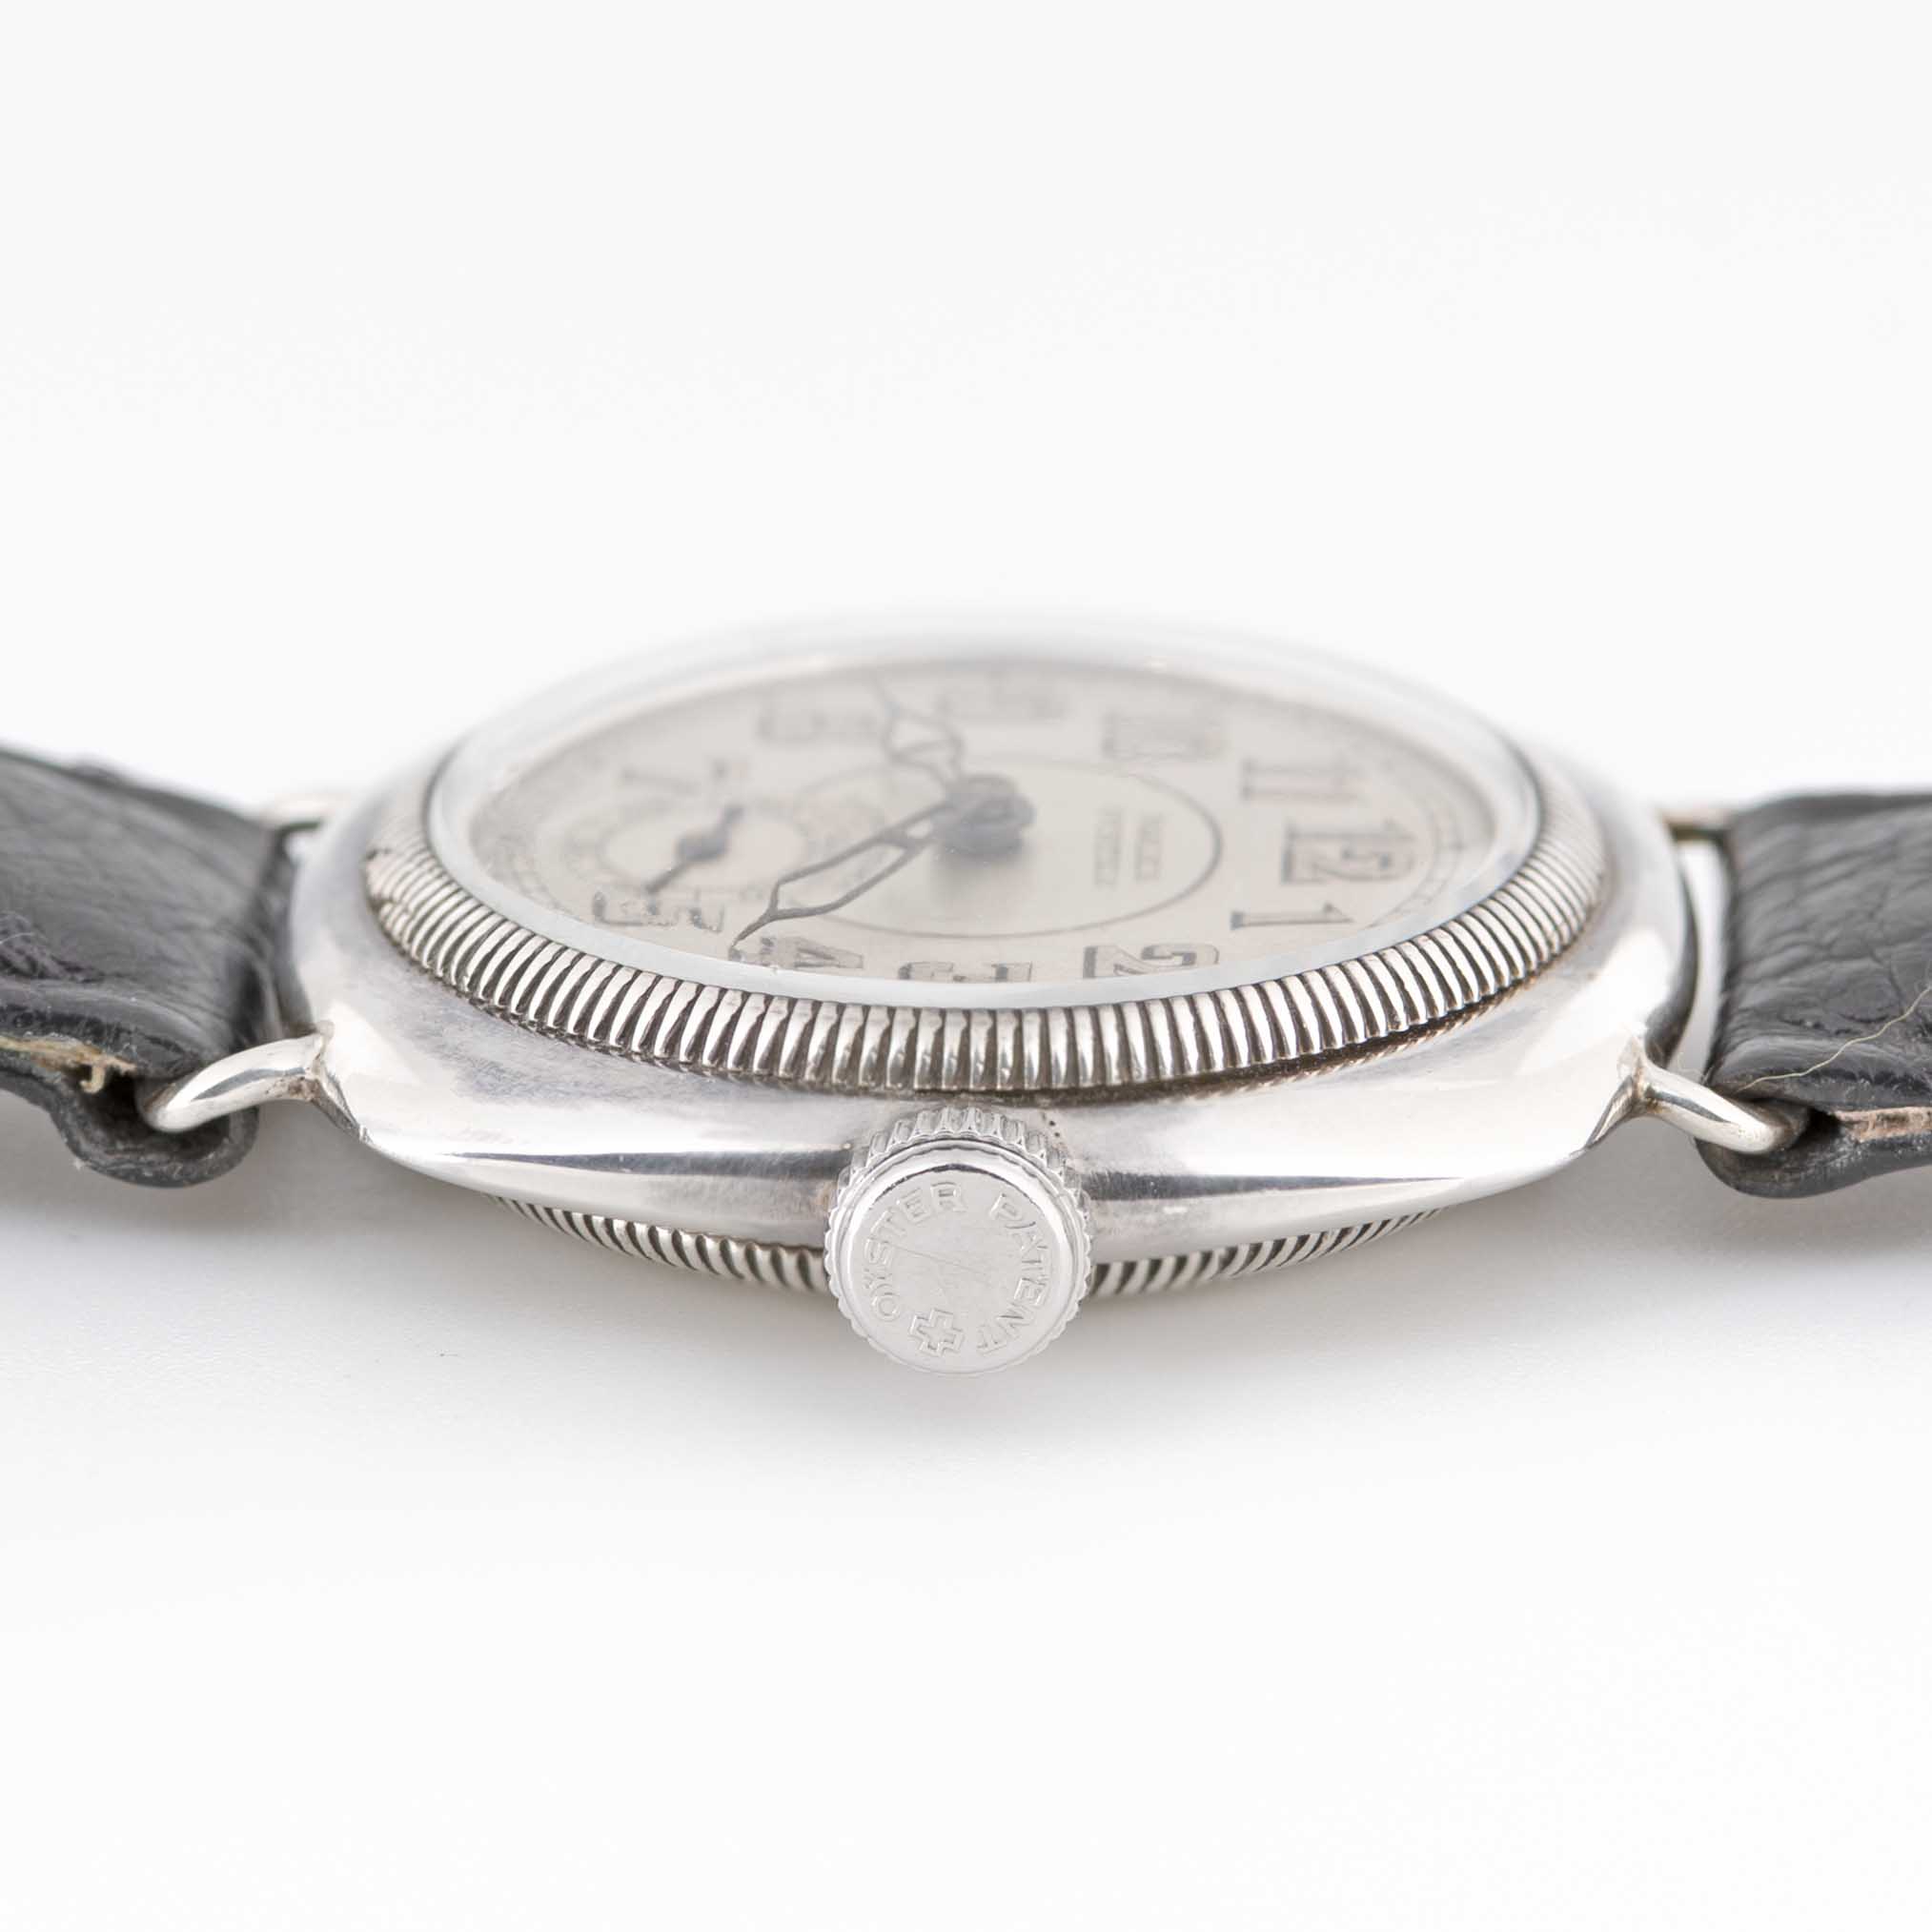 A GENTLEMAN'S SIZE SOLID SILVER ROLEX OYSTER 'CUSHION' WRIST WATCH CIRCA 1931, REF. 6753 Movement: - Image 9 of 10